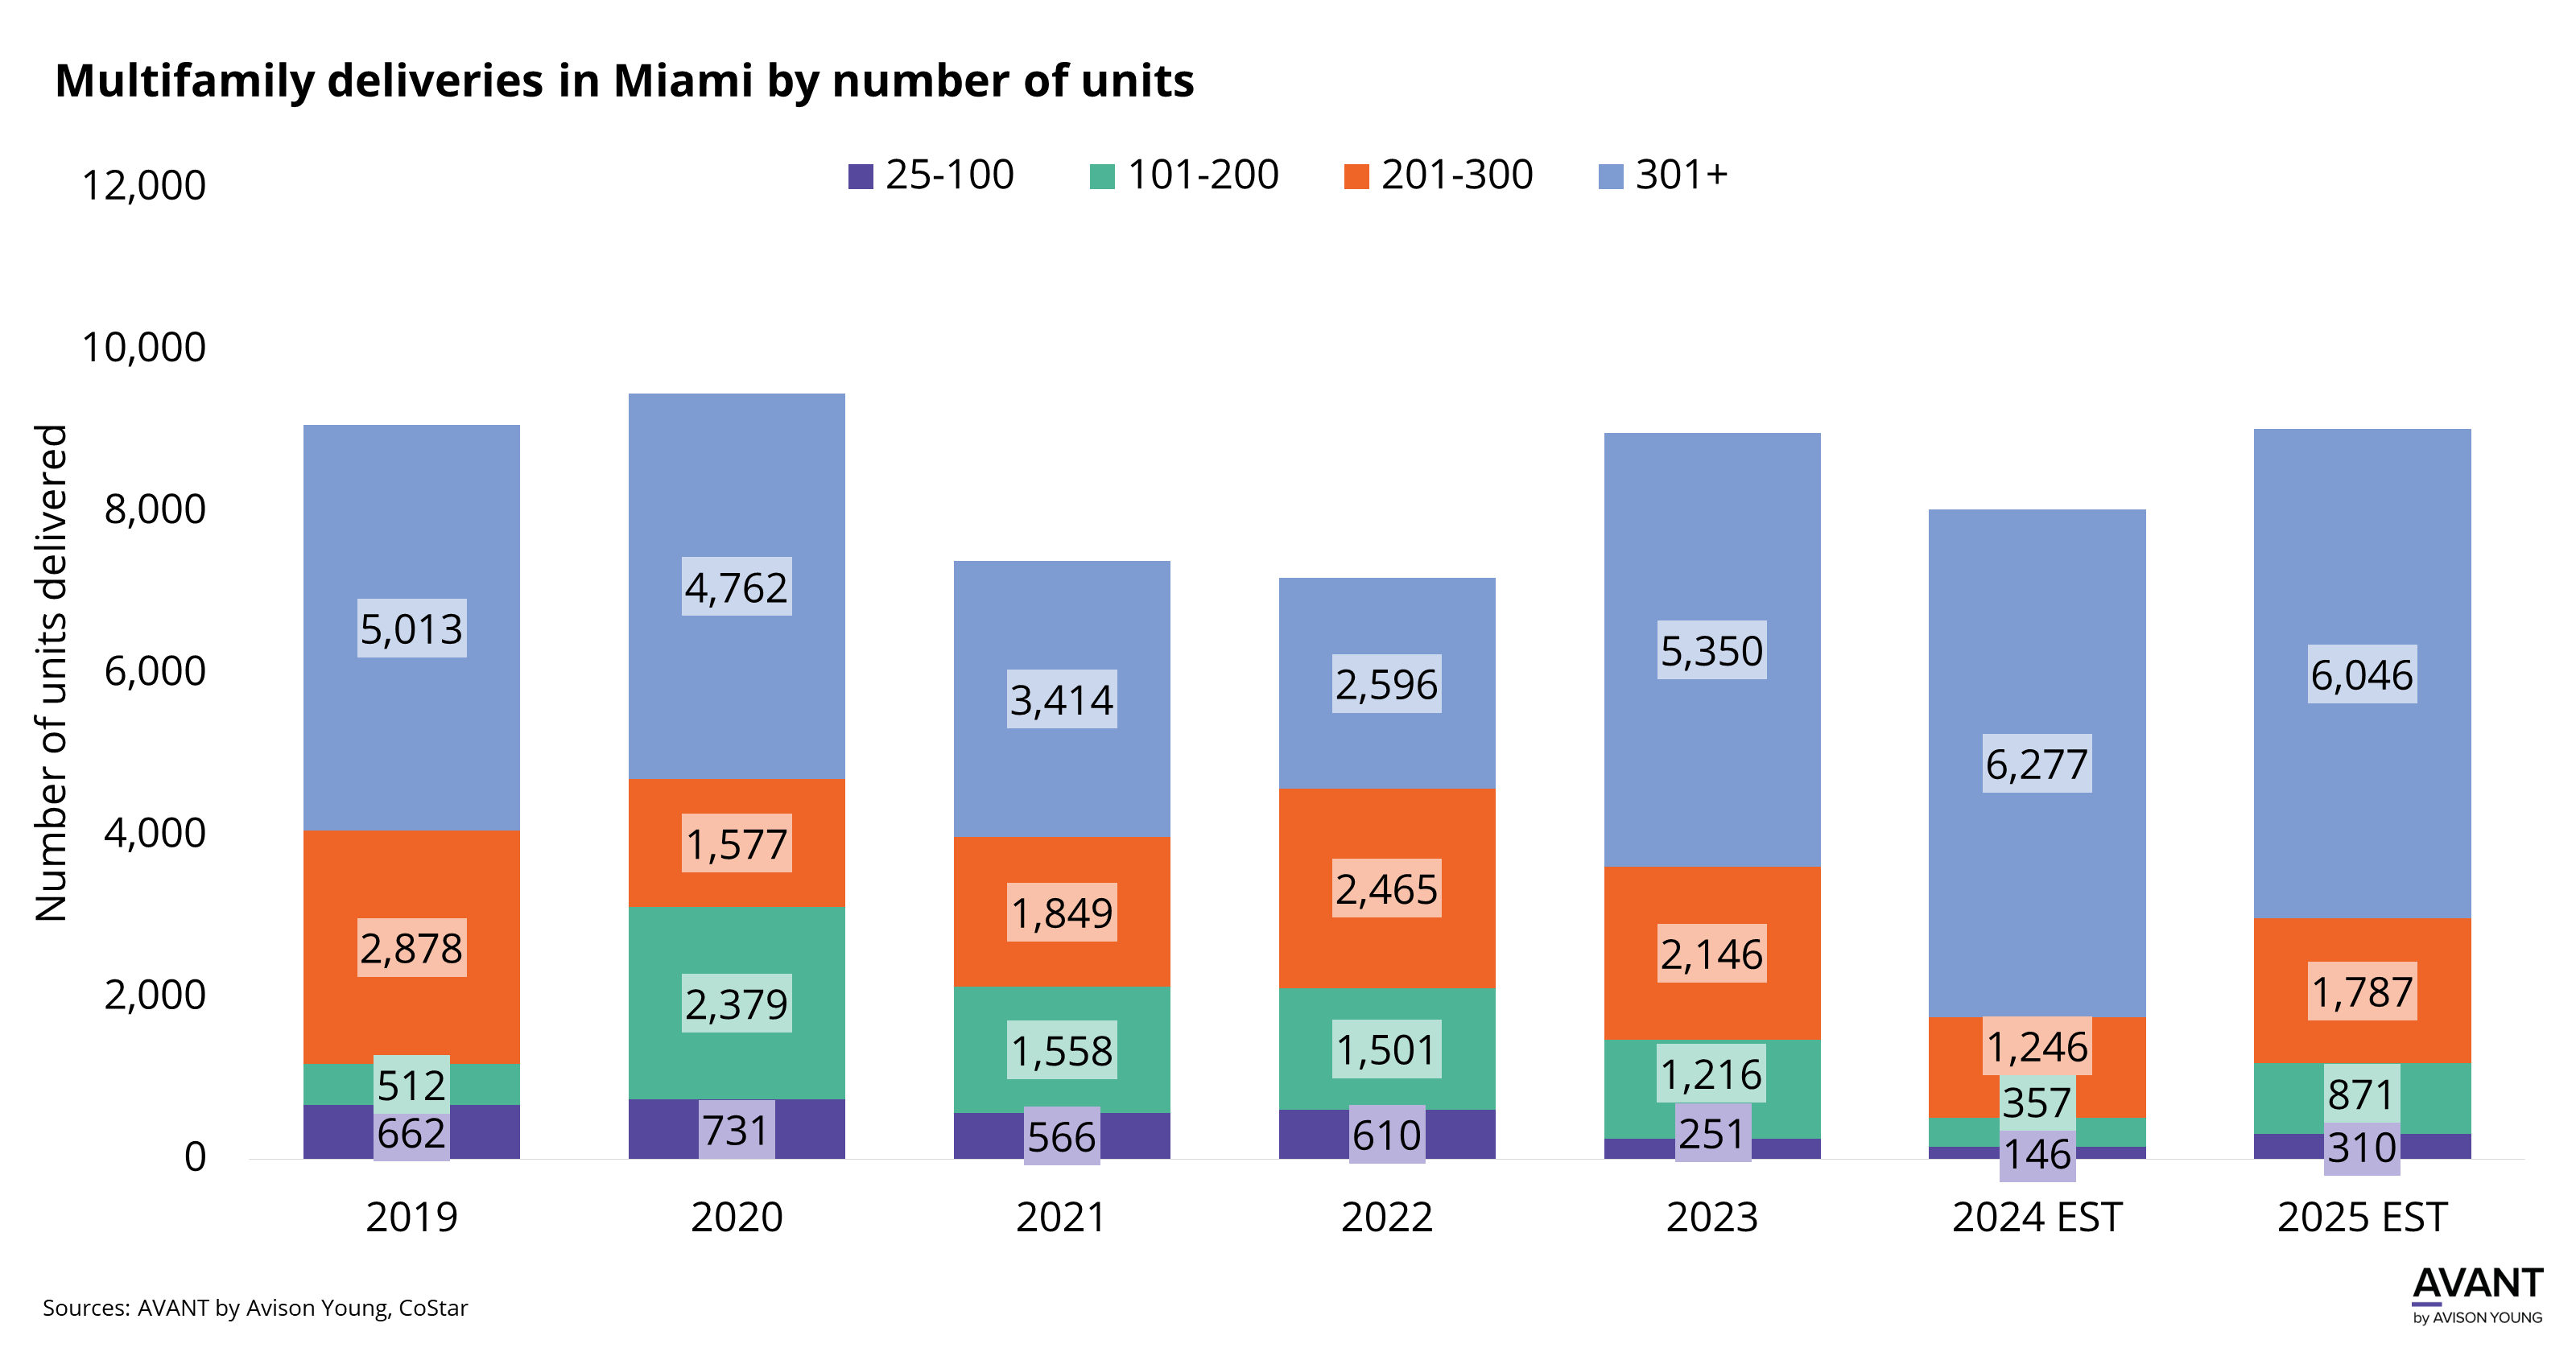 graph of multifamily deliveries in Miami by number of units from 2019 to 2025